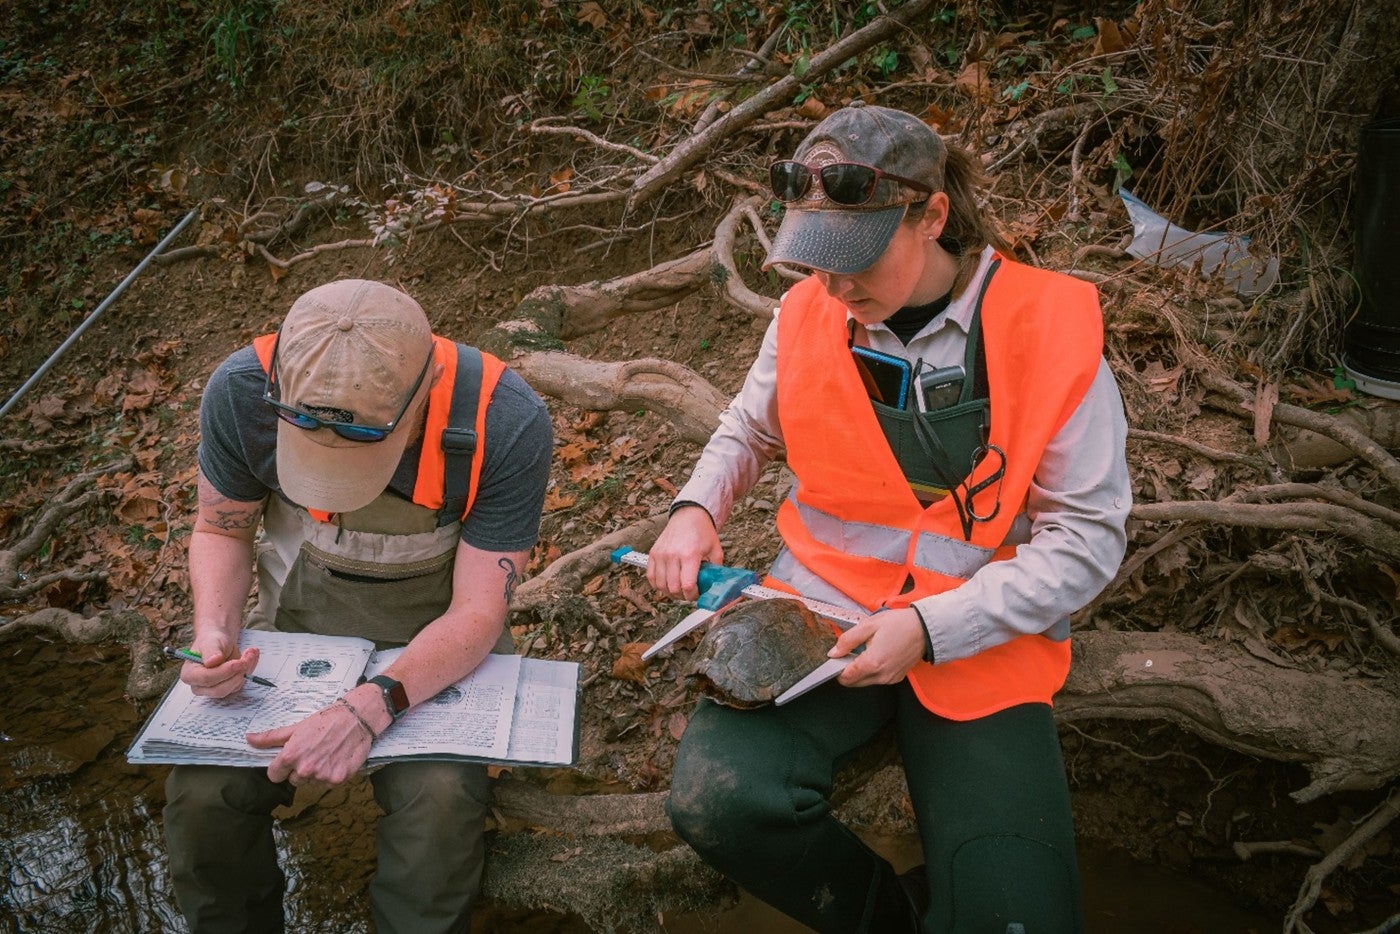 Researchers wearing hats, waders and vests sit on a streambank. One holds a turtle and measures its shell while another records data in a notebook